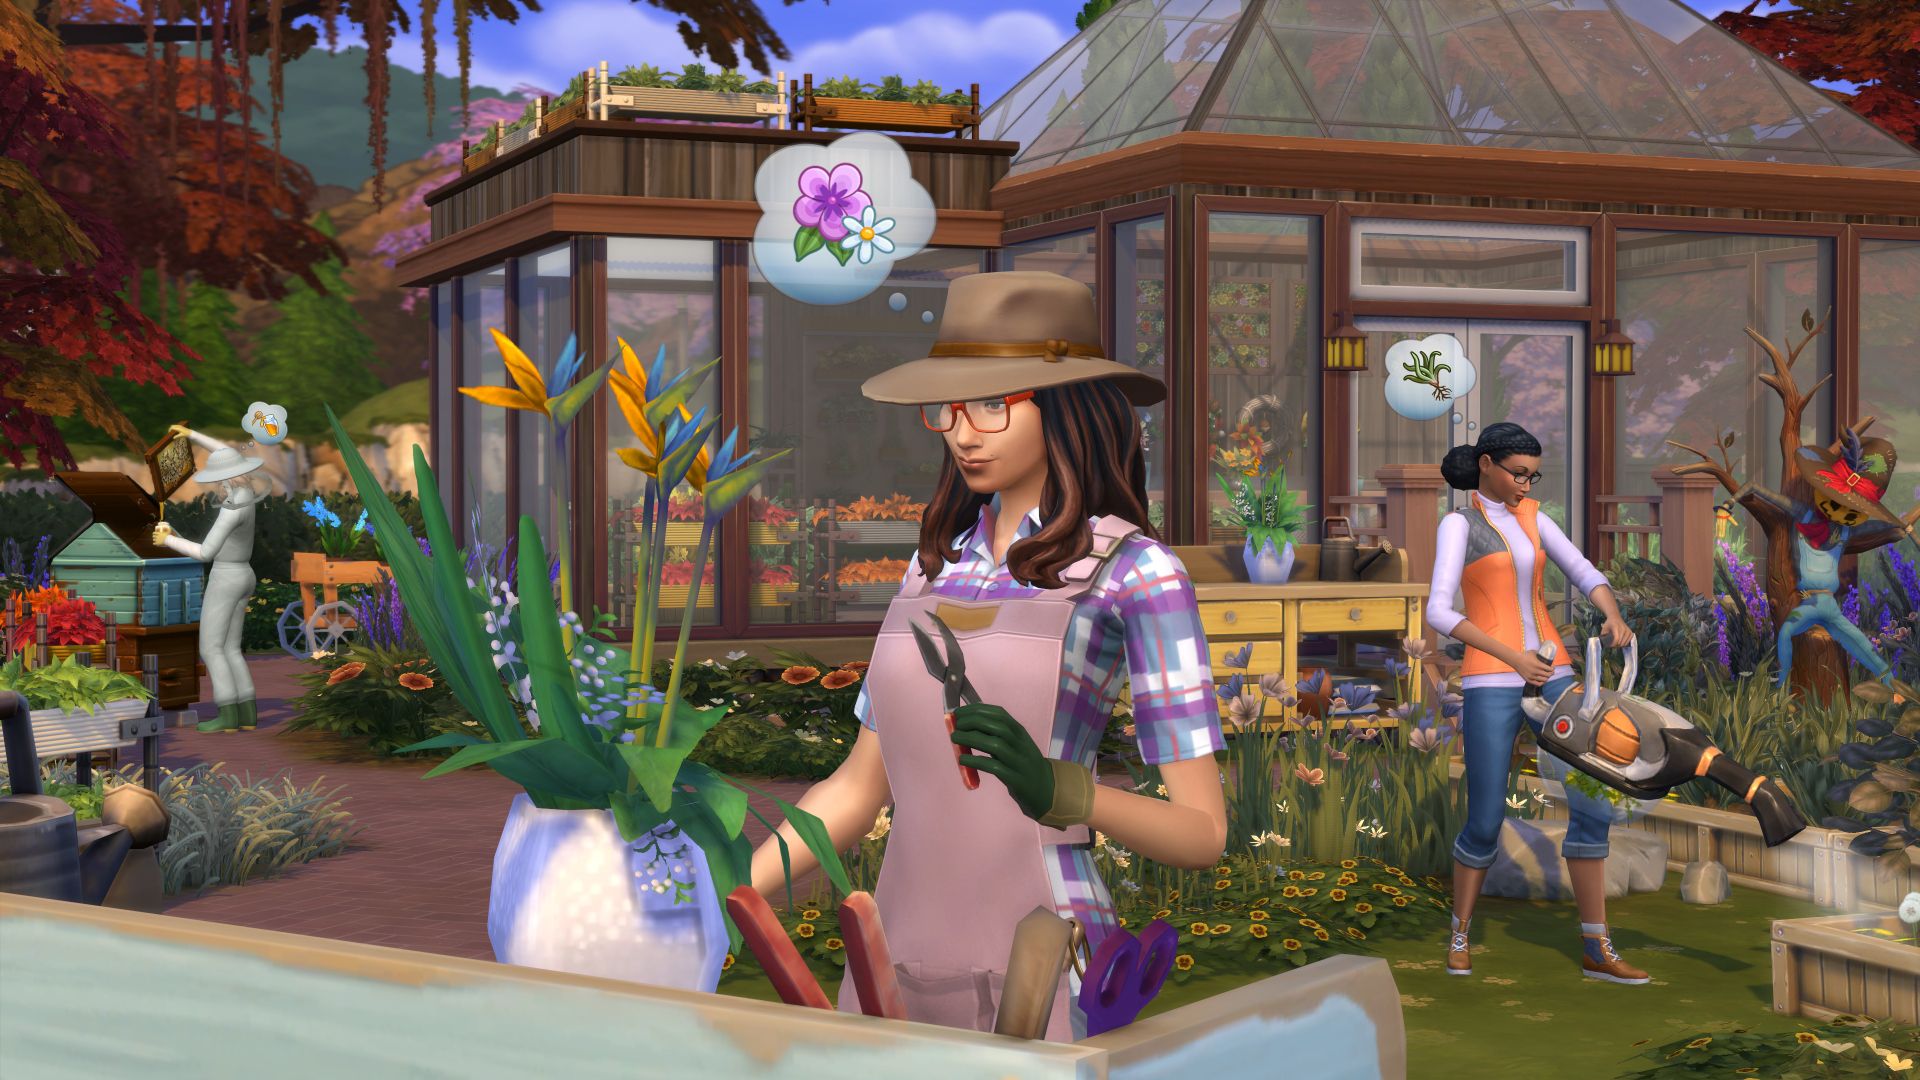 Sims 4 Seasons promotional shot with a sim flower arranging in the foreground.